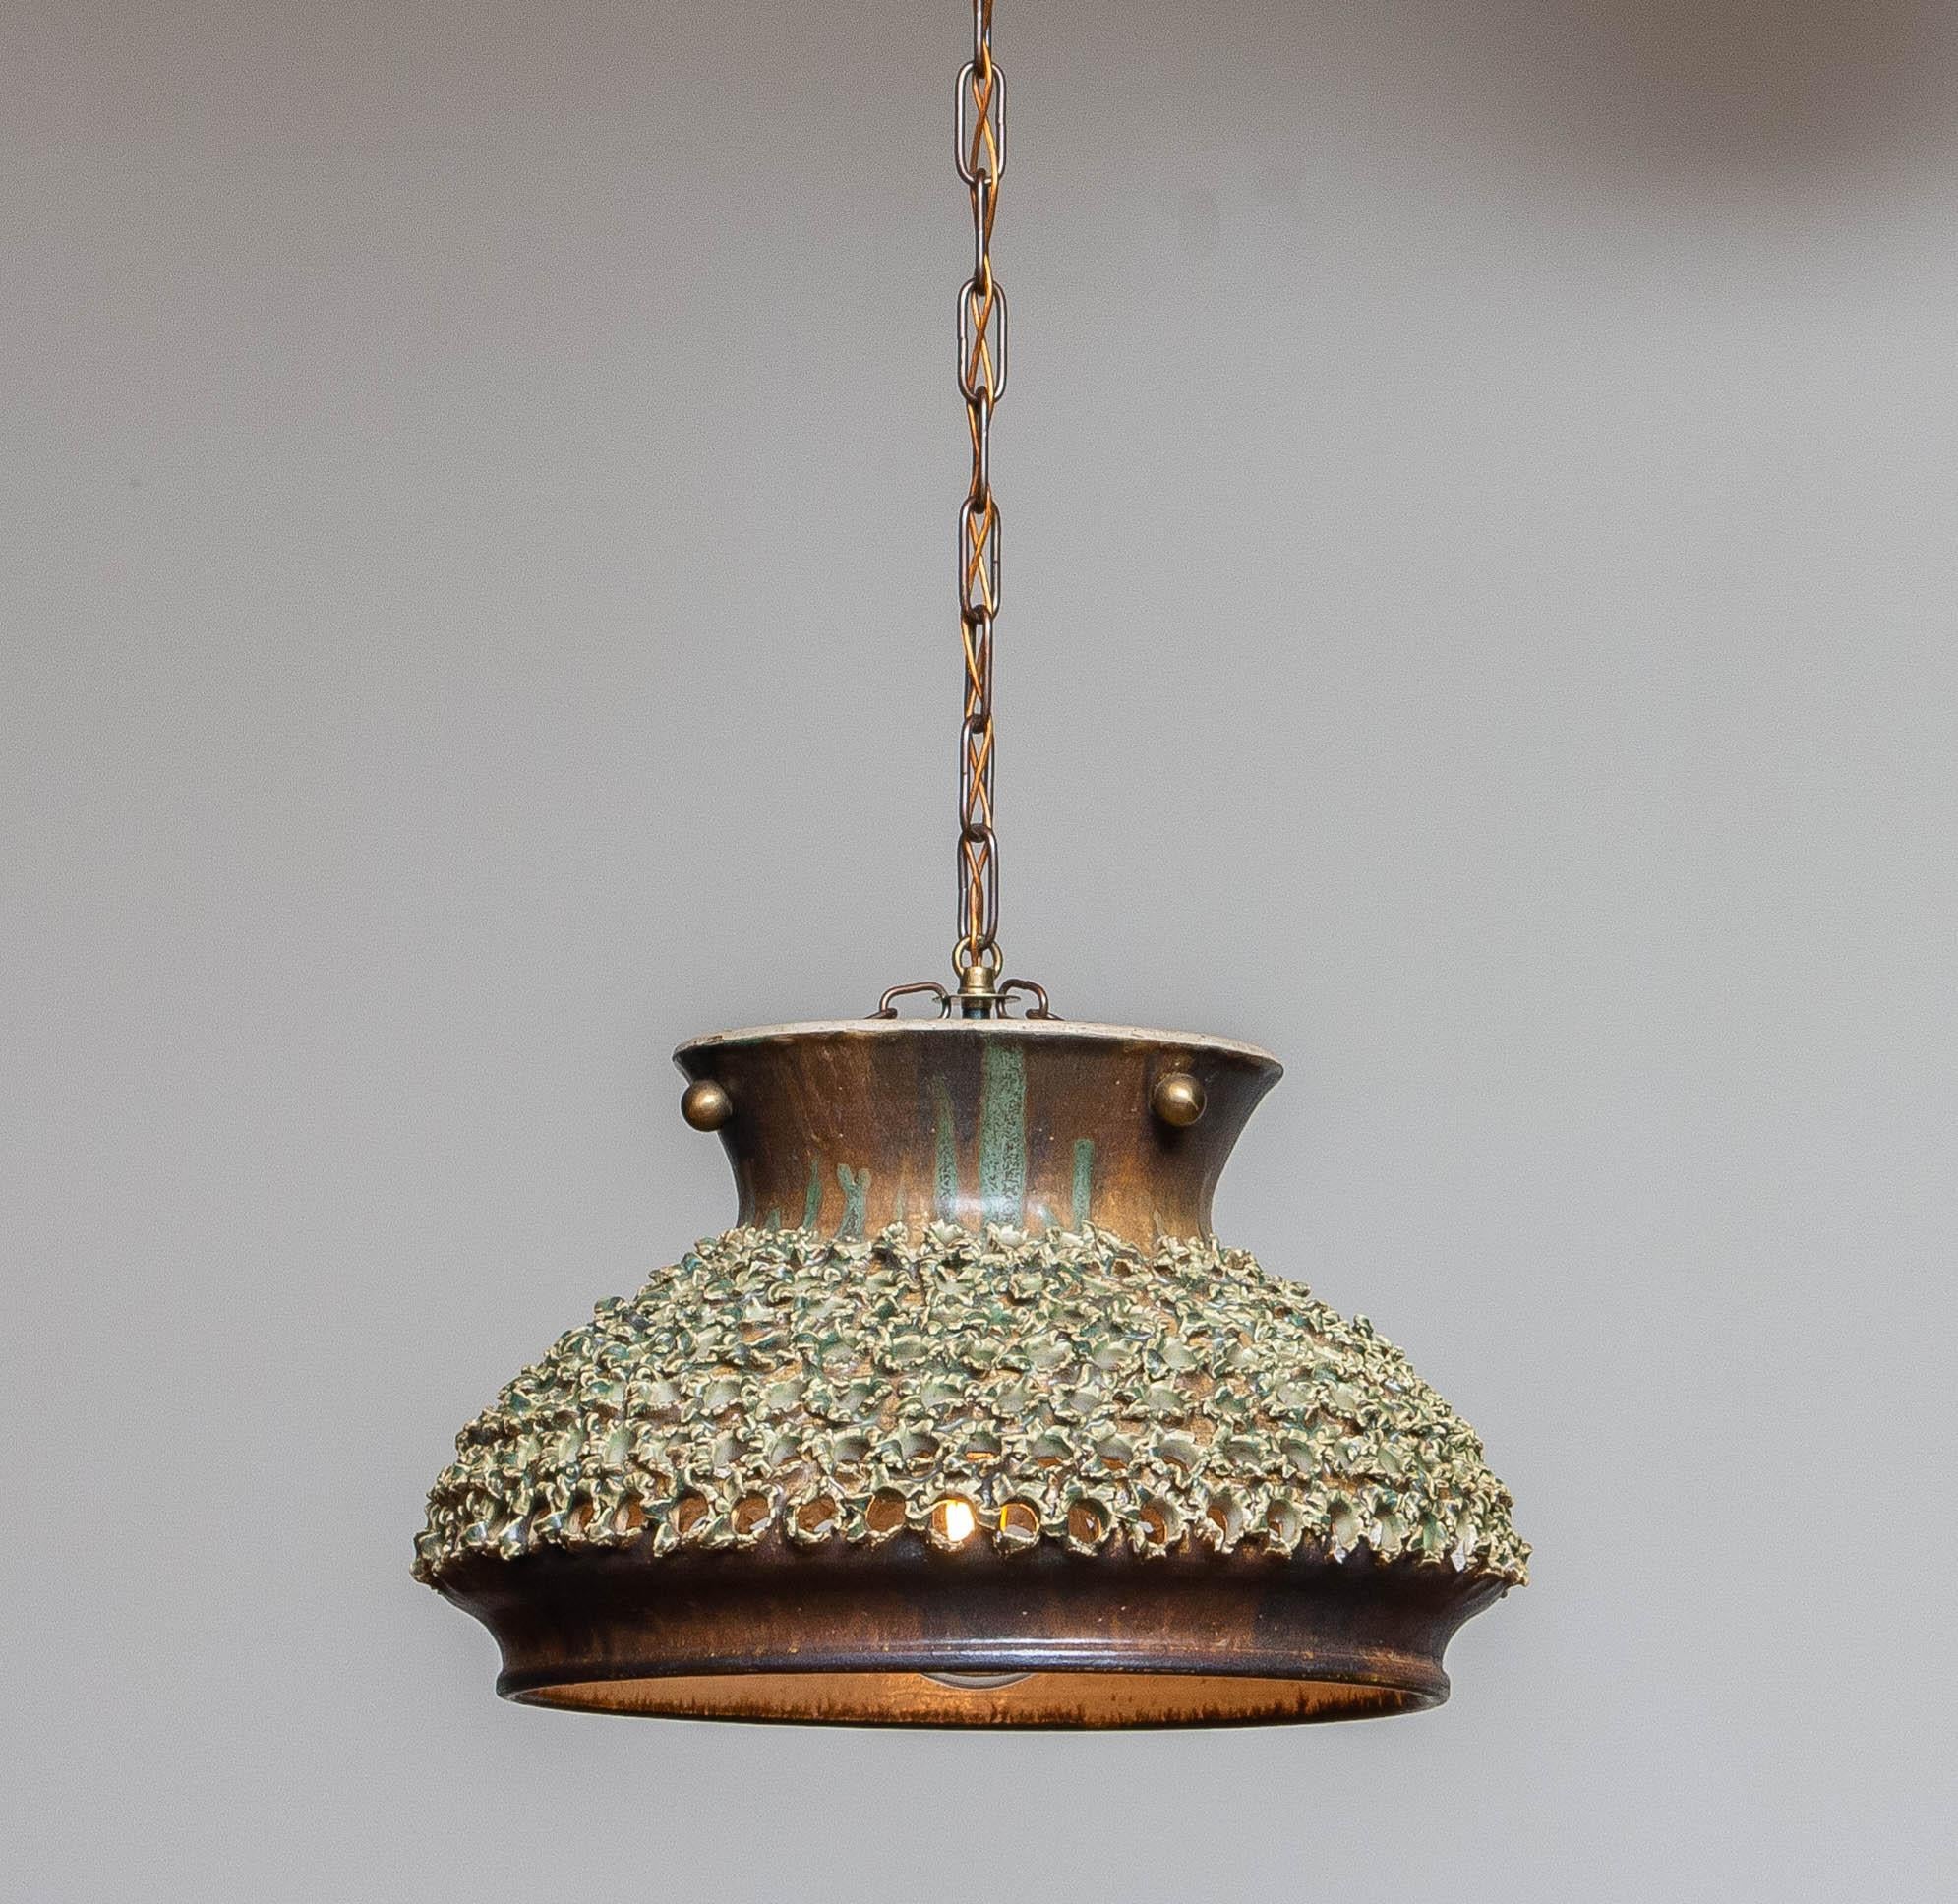 1960's Hand-Crafted Perforated Ceramic Organically Danish Pendant by Sejer In Excellent Condition In Silvolde, Gelderland